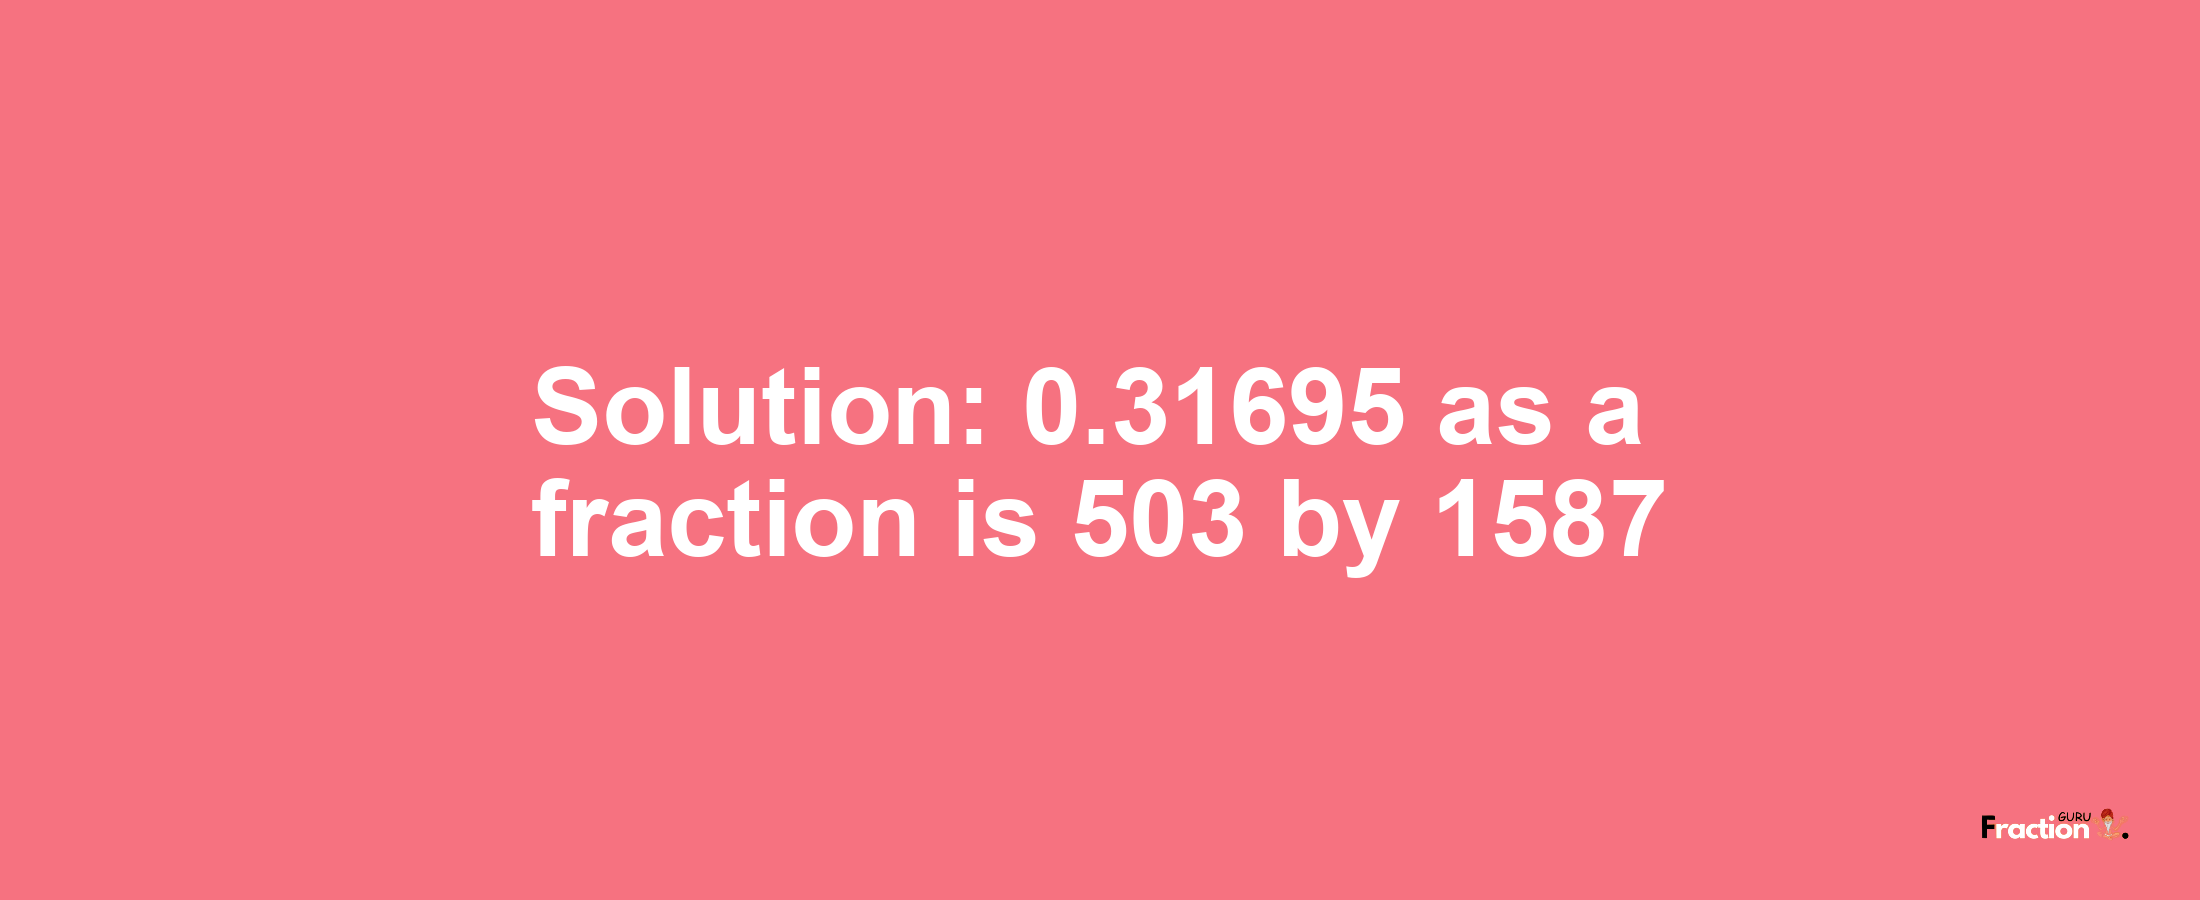 Solution:0.31695 as a fraction is 503/1587